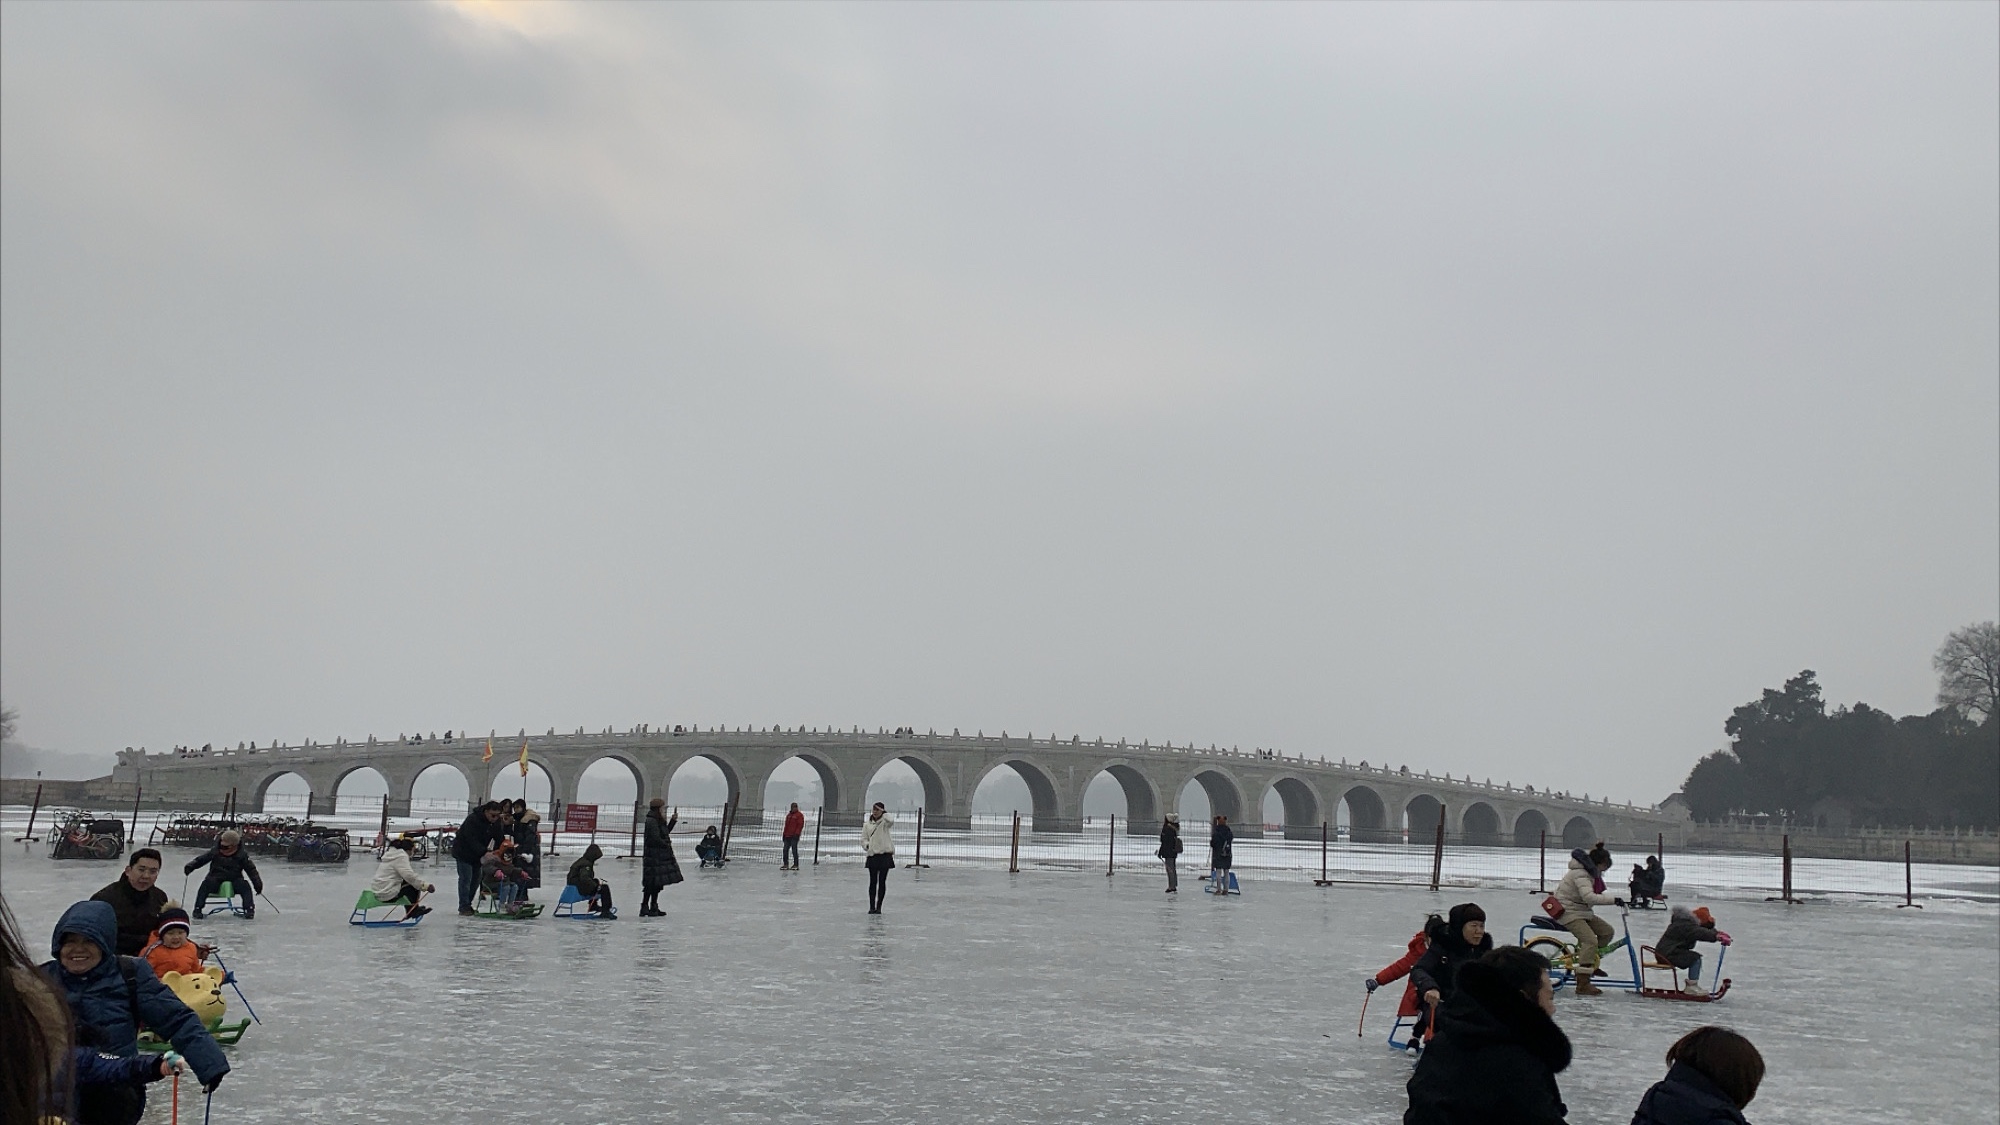 A bridge leading over the frozen lake to Summer palace. Ice skaters in the foreground